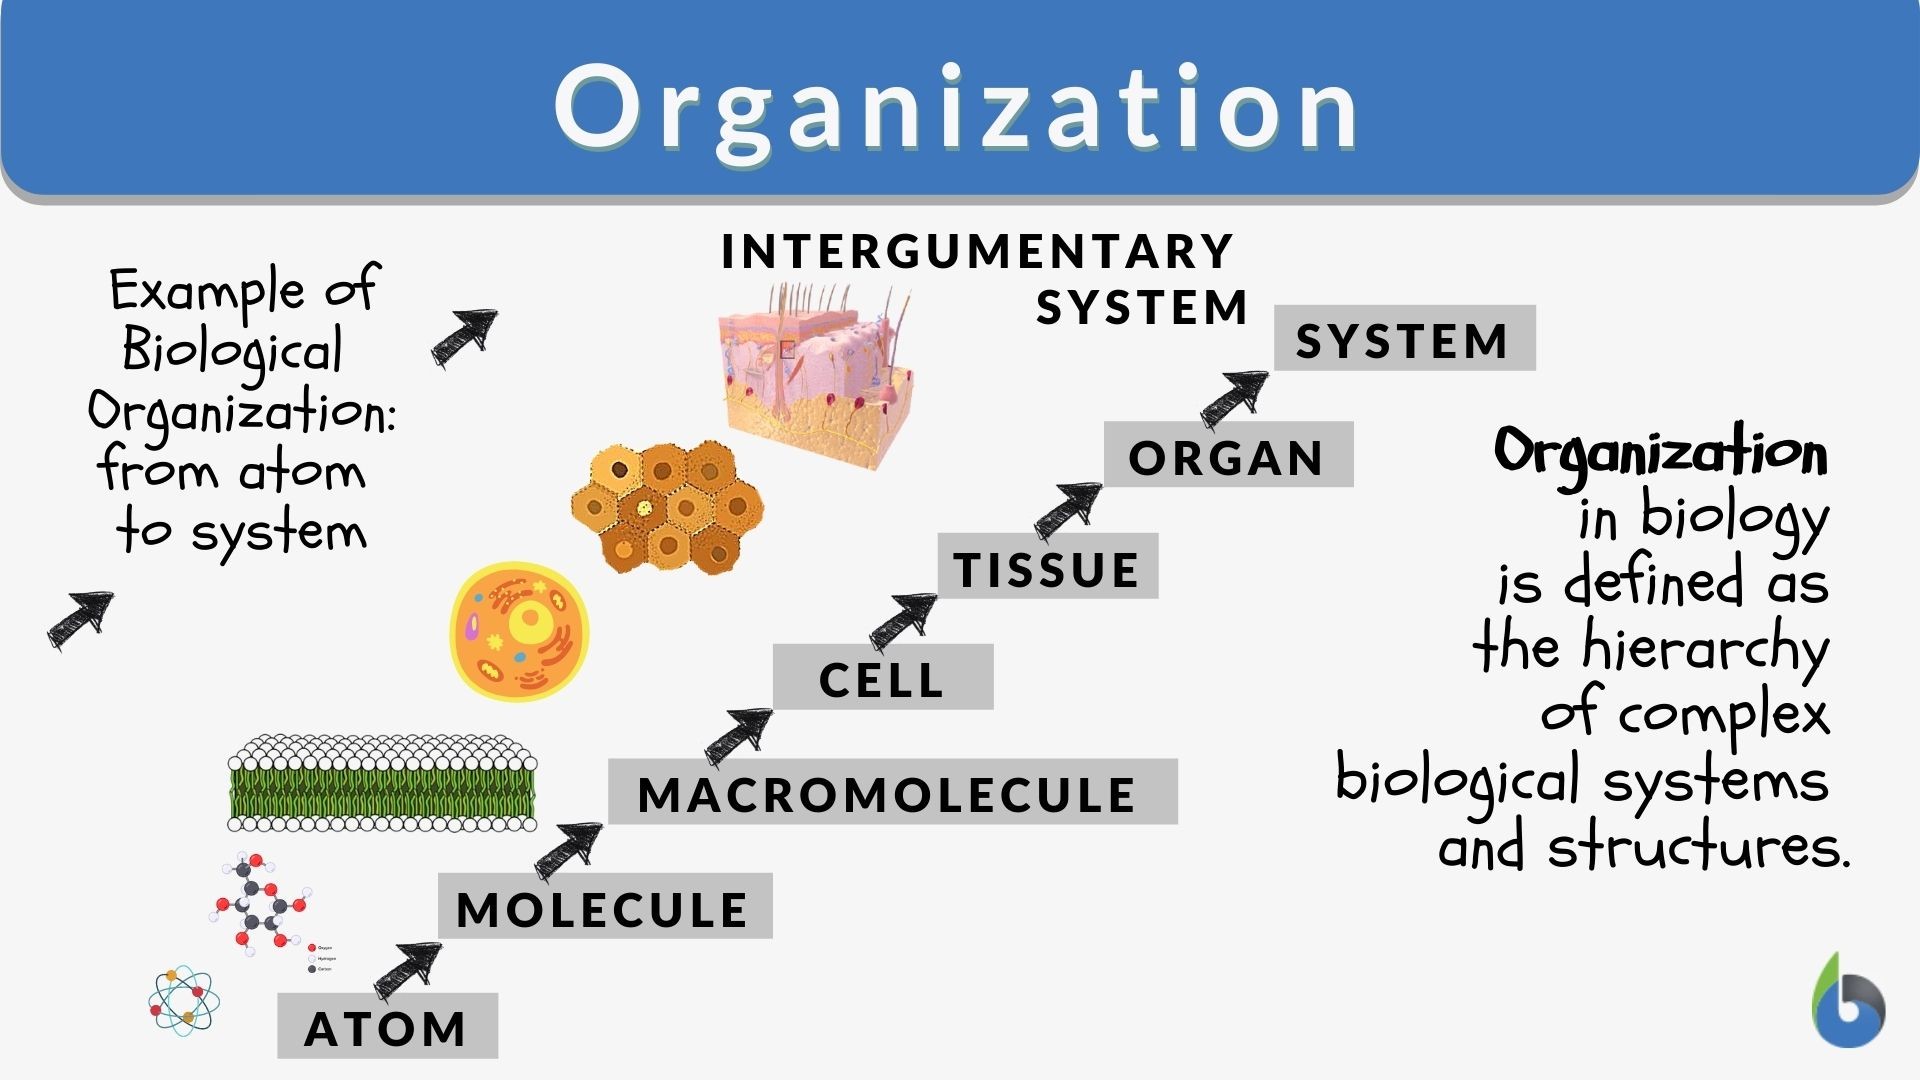 Organization - Definition and Examples - Biology Online Dictionary